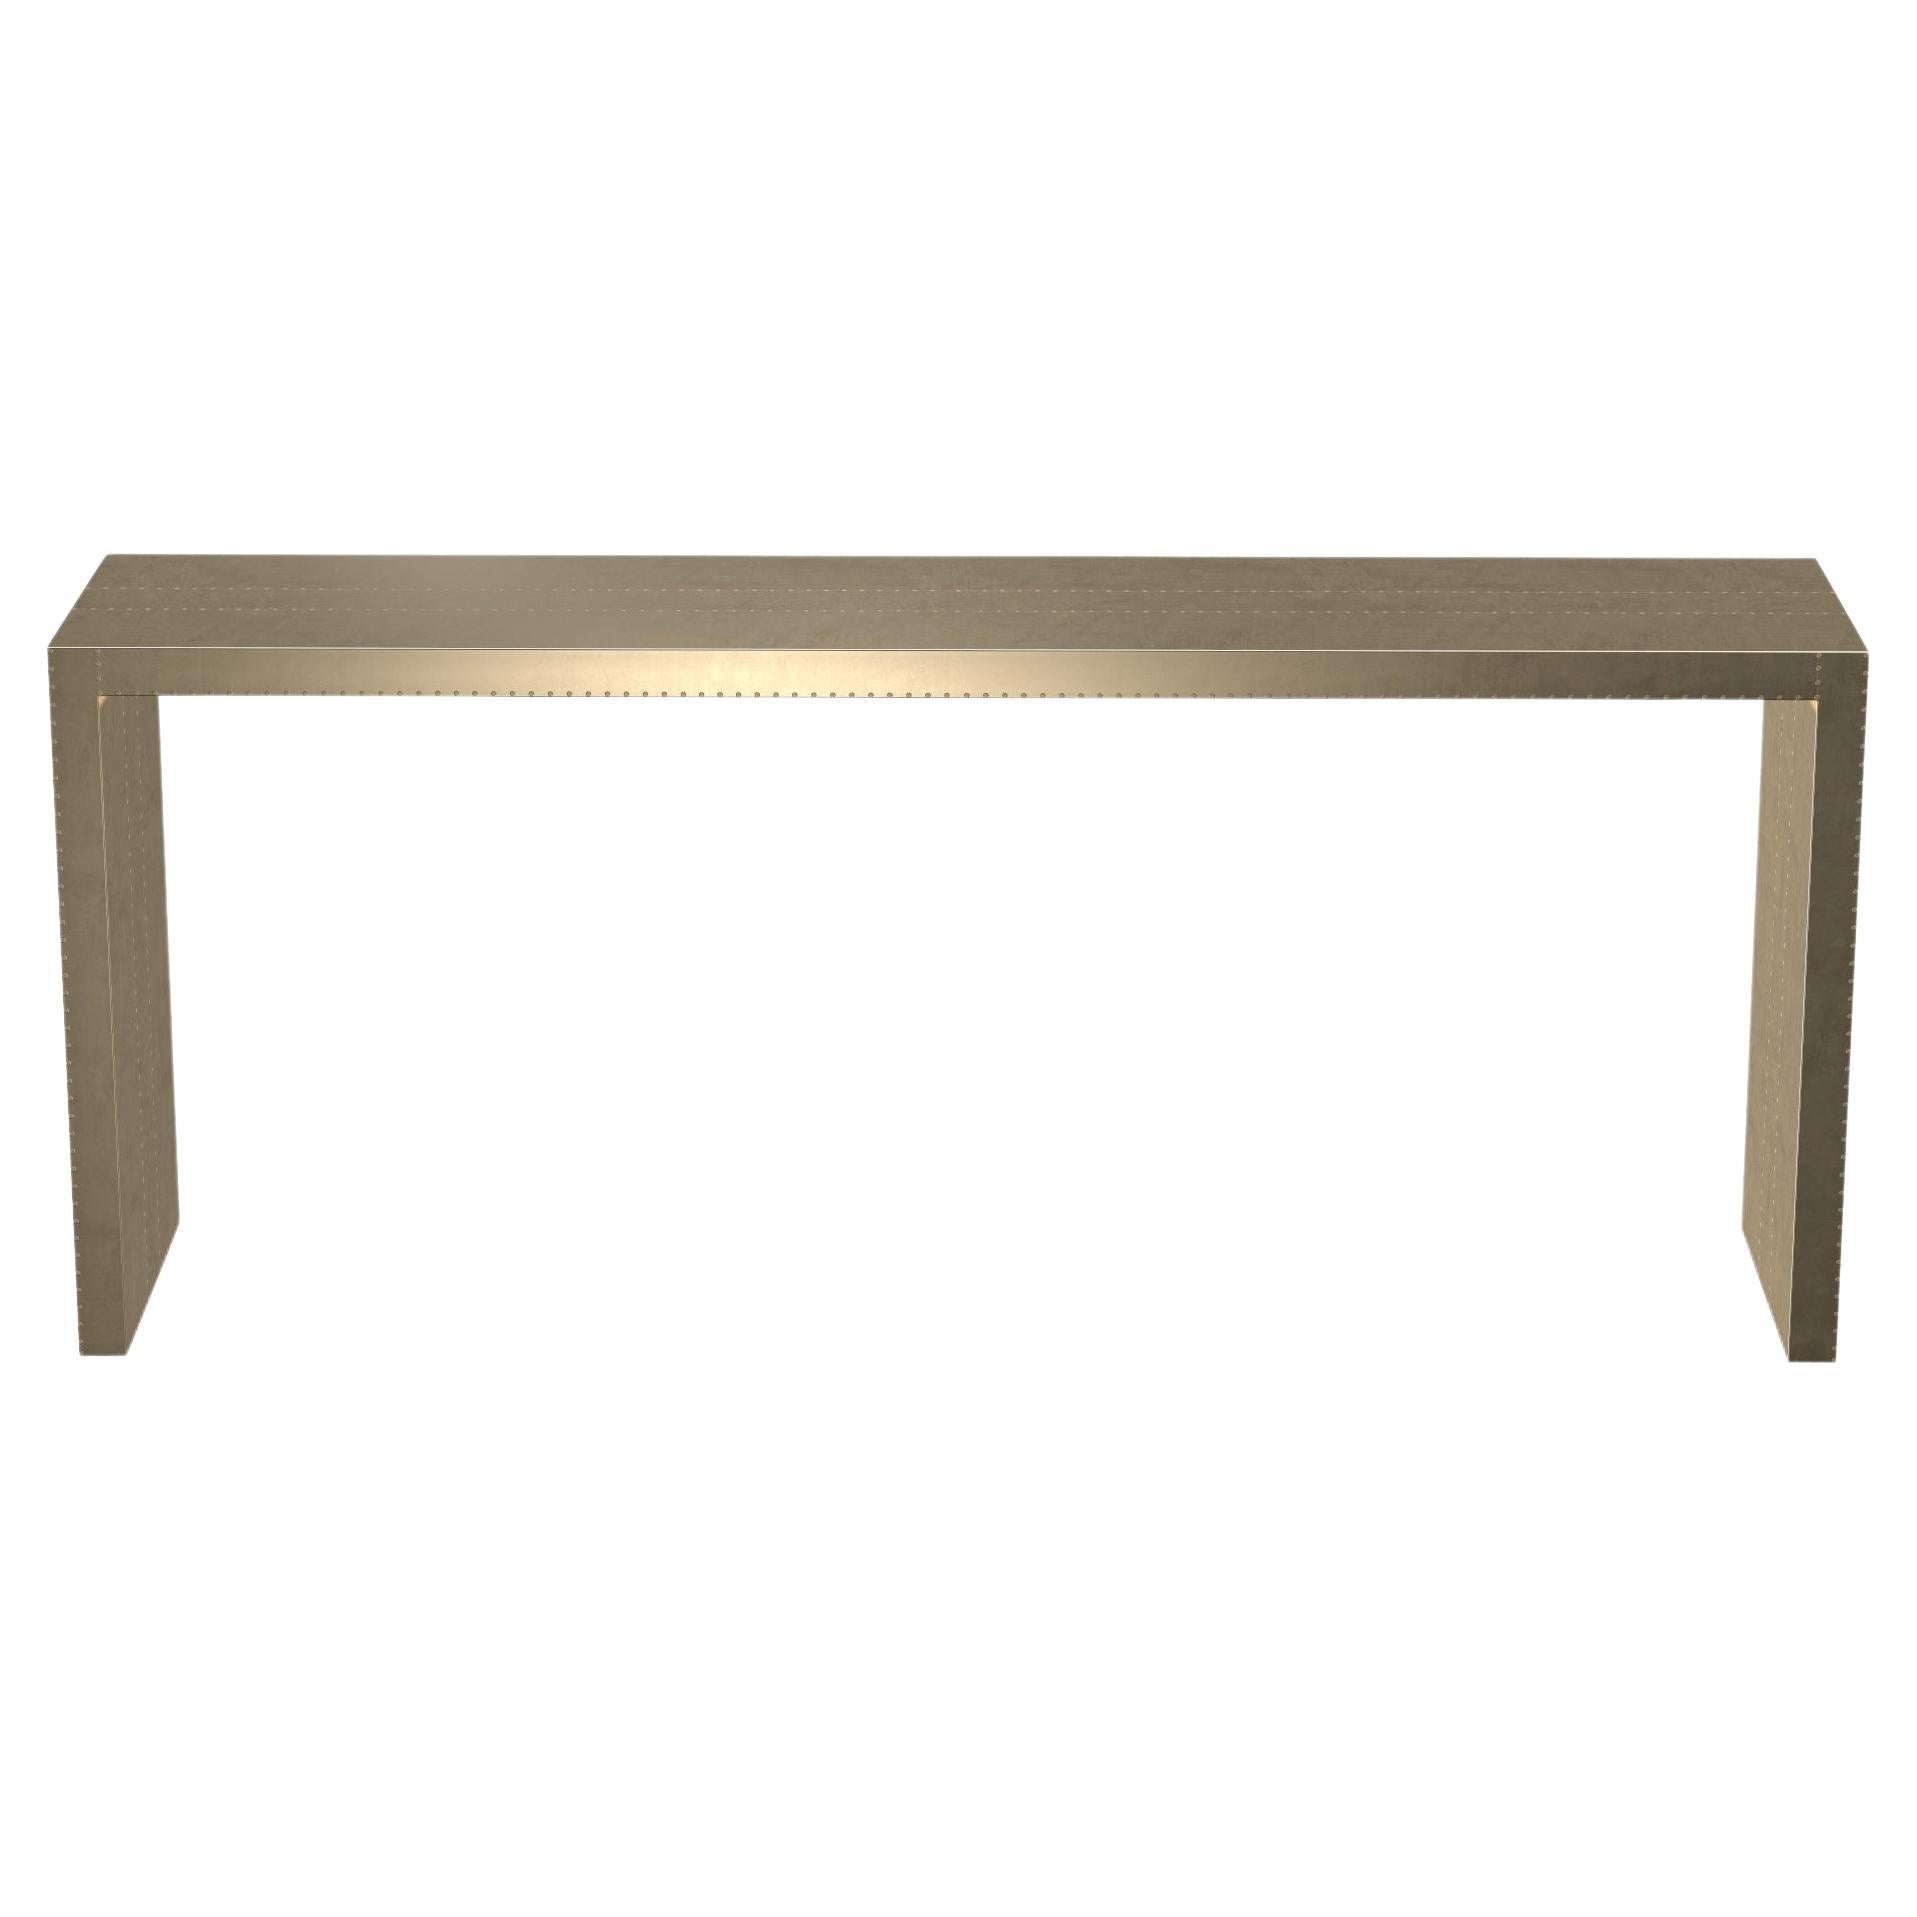 Art Deco Coffee and Cocktail Tables Rectangular Console in Smooth Brass  For Sale